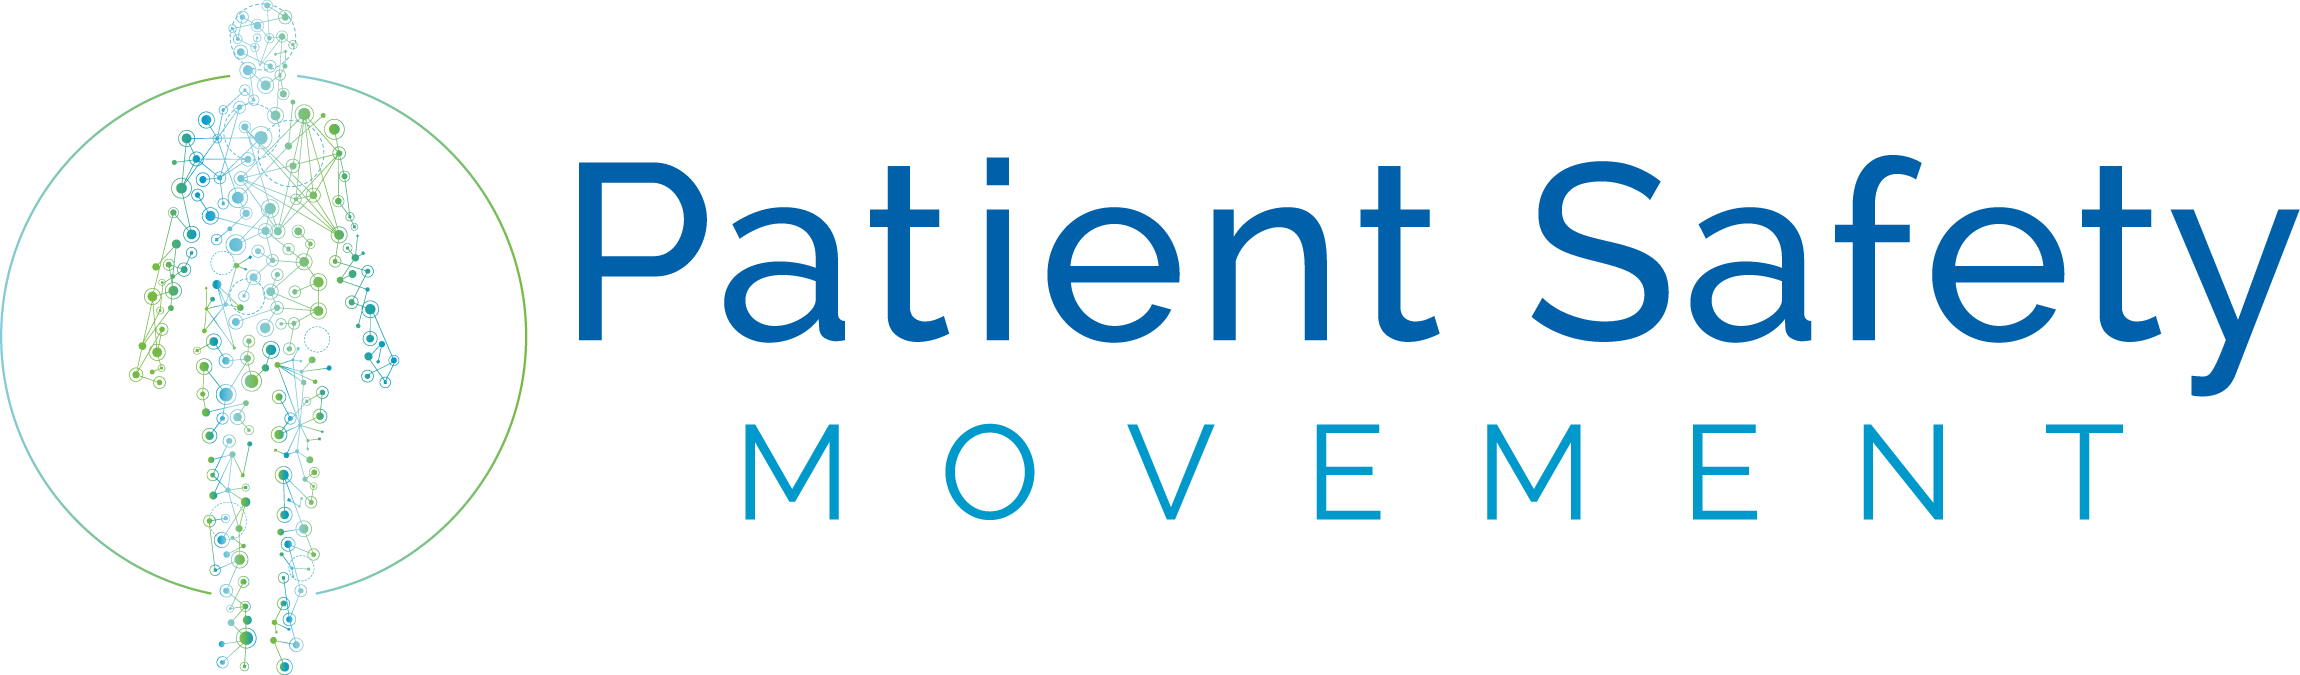 The Patient Safety Movement logo